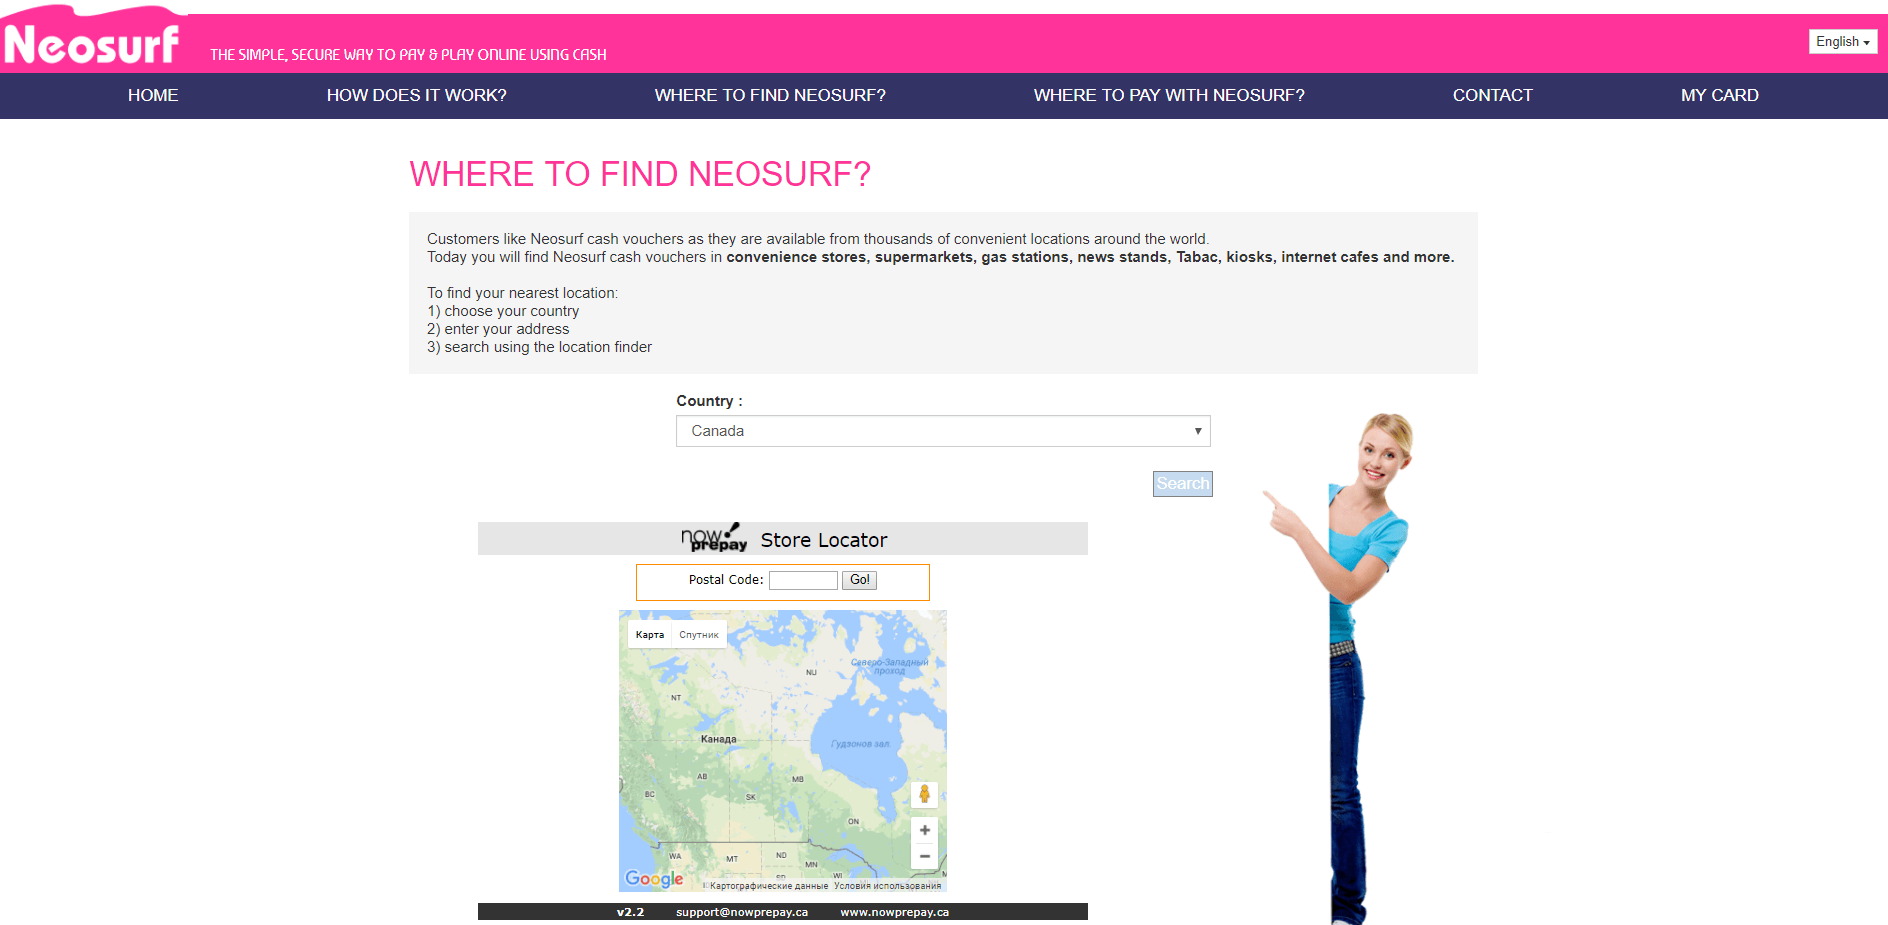 Finding Neosurf in your country